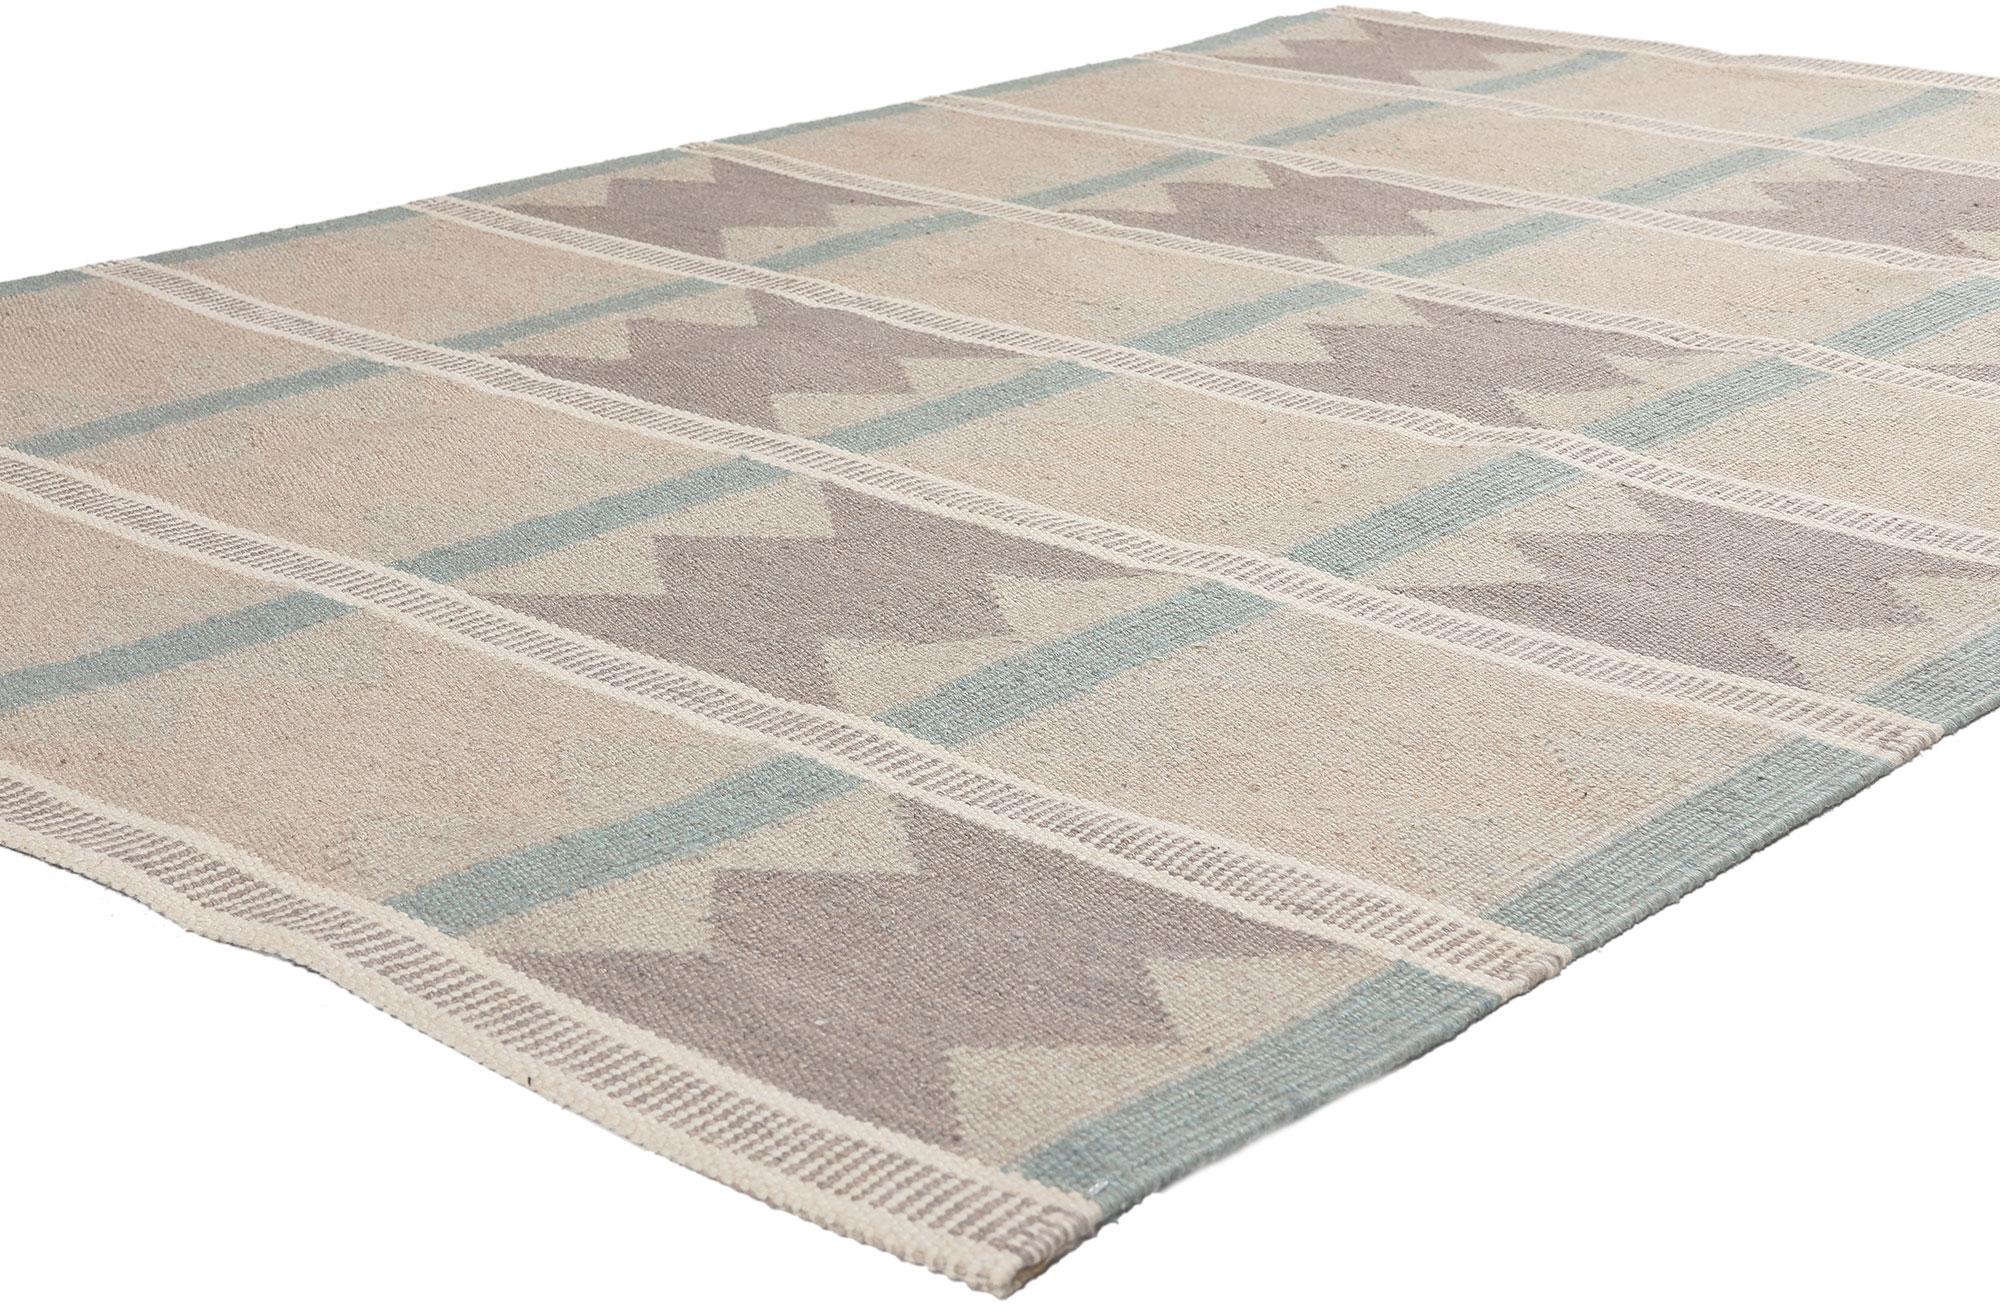 30695 Ingegerd Silow Swedish Inspired Kilim Rug, 05'04 x 07'09.
Sublime simplicity meets Scandinavian Modern style in this handwoven Swedish inspired Kilim rug. The geometric panel design and earthy hues woven into this piece work together creating